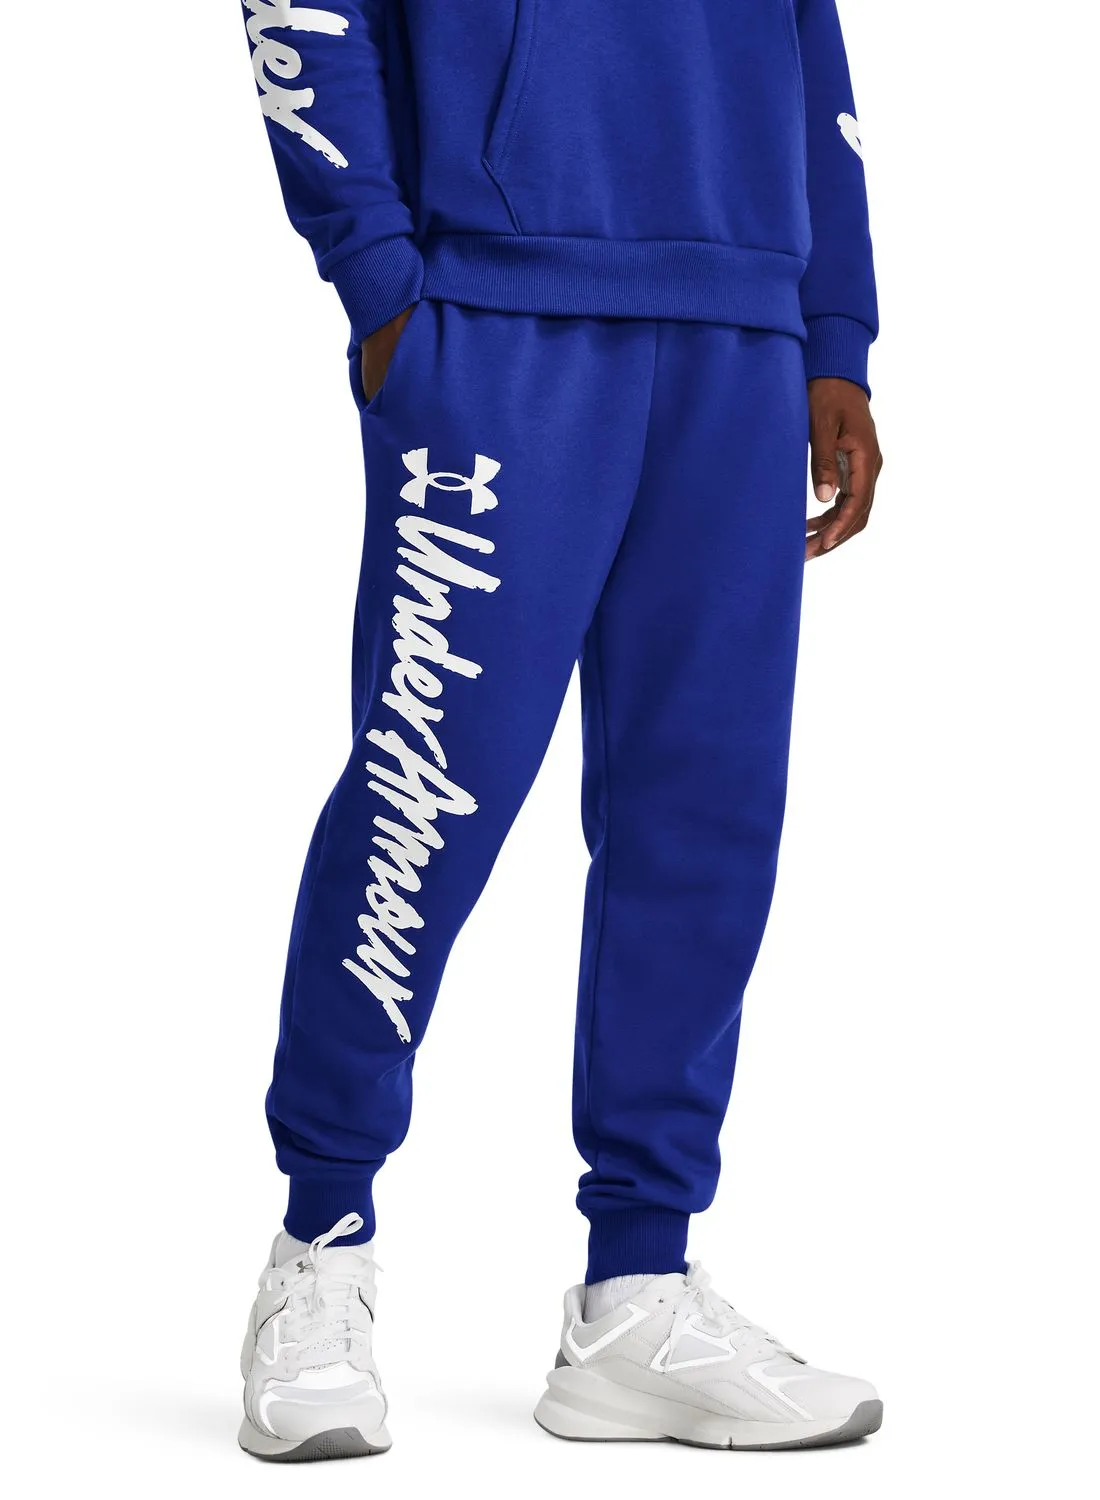 UNDER ARMOUR Rival Fleece Graphic Joggers